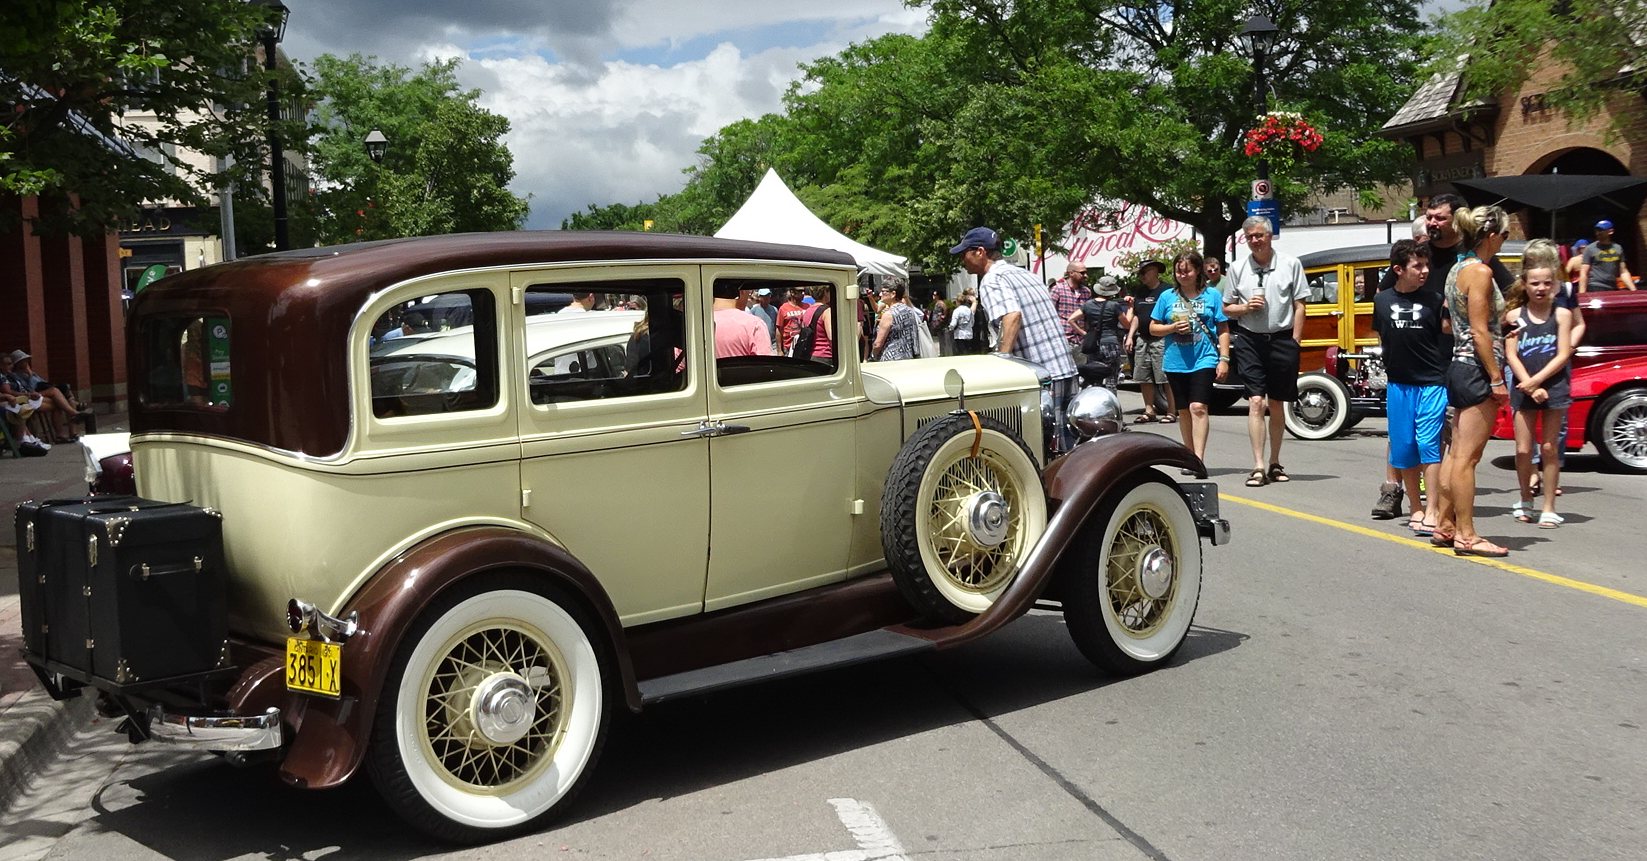 Car show - cream coloured with trunk